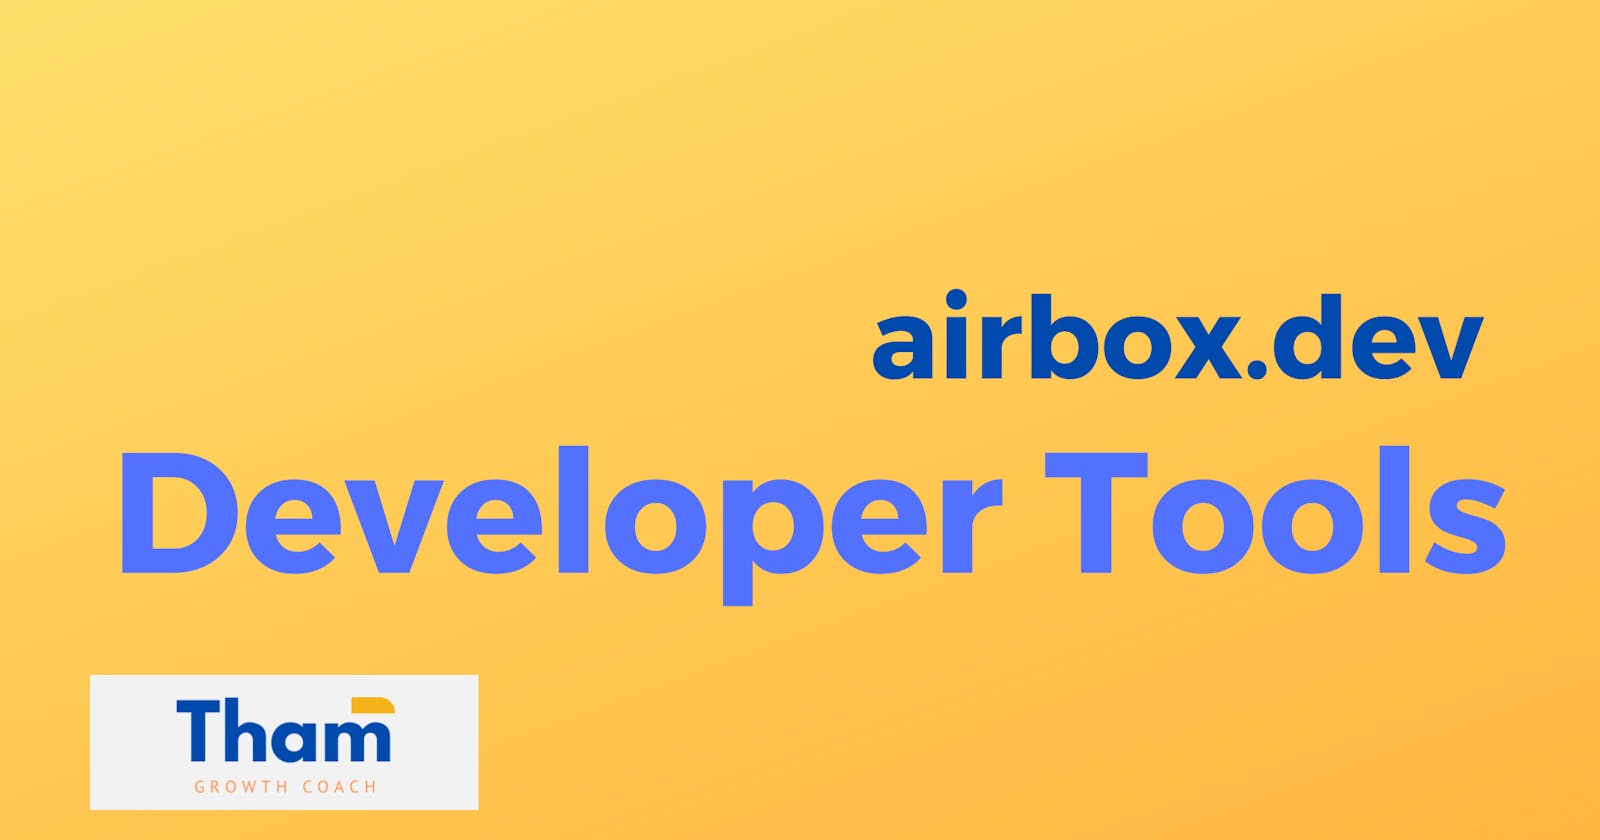 airbox.dev is launched